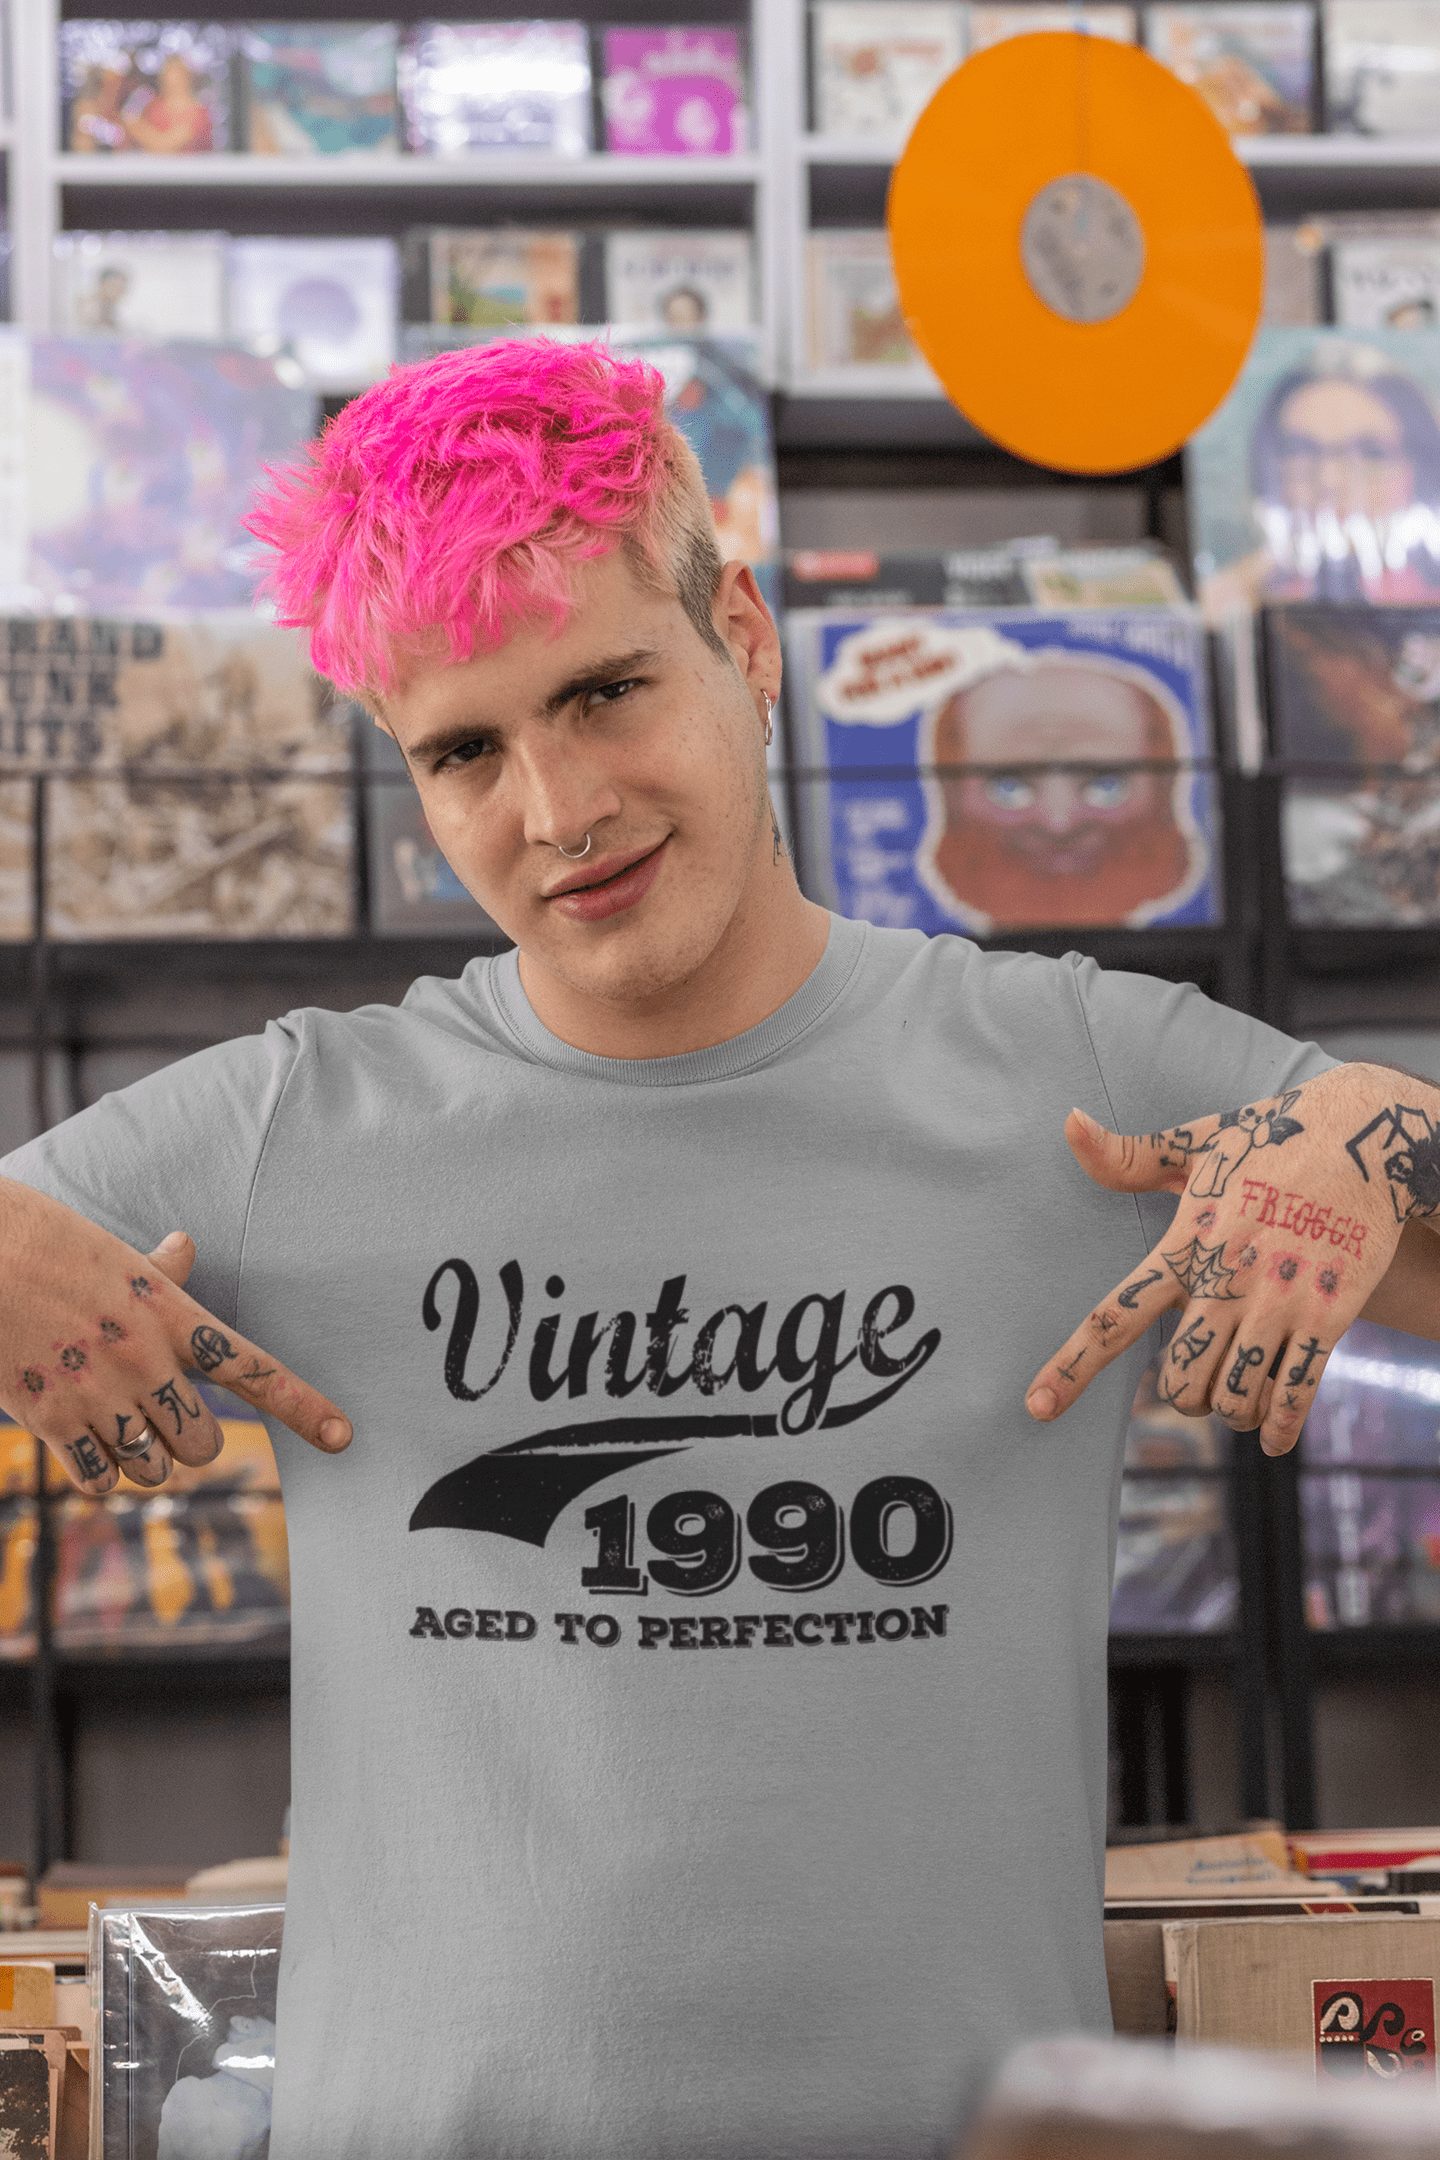 Vintage Aged to Perfection 1990, Grey, Men's Short Sleeve Round Neck T-shirt, gift t-shirt 00346